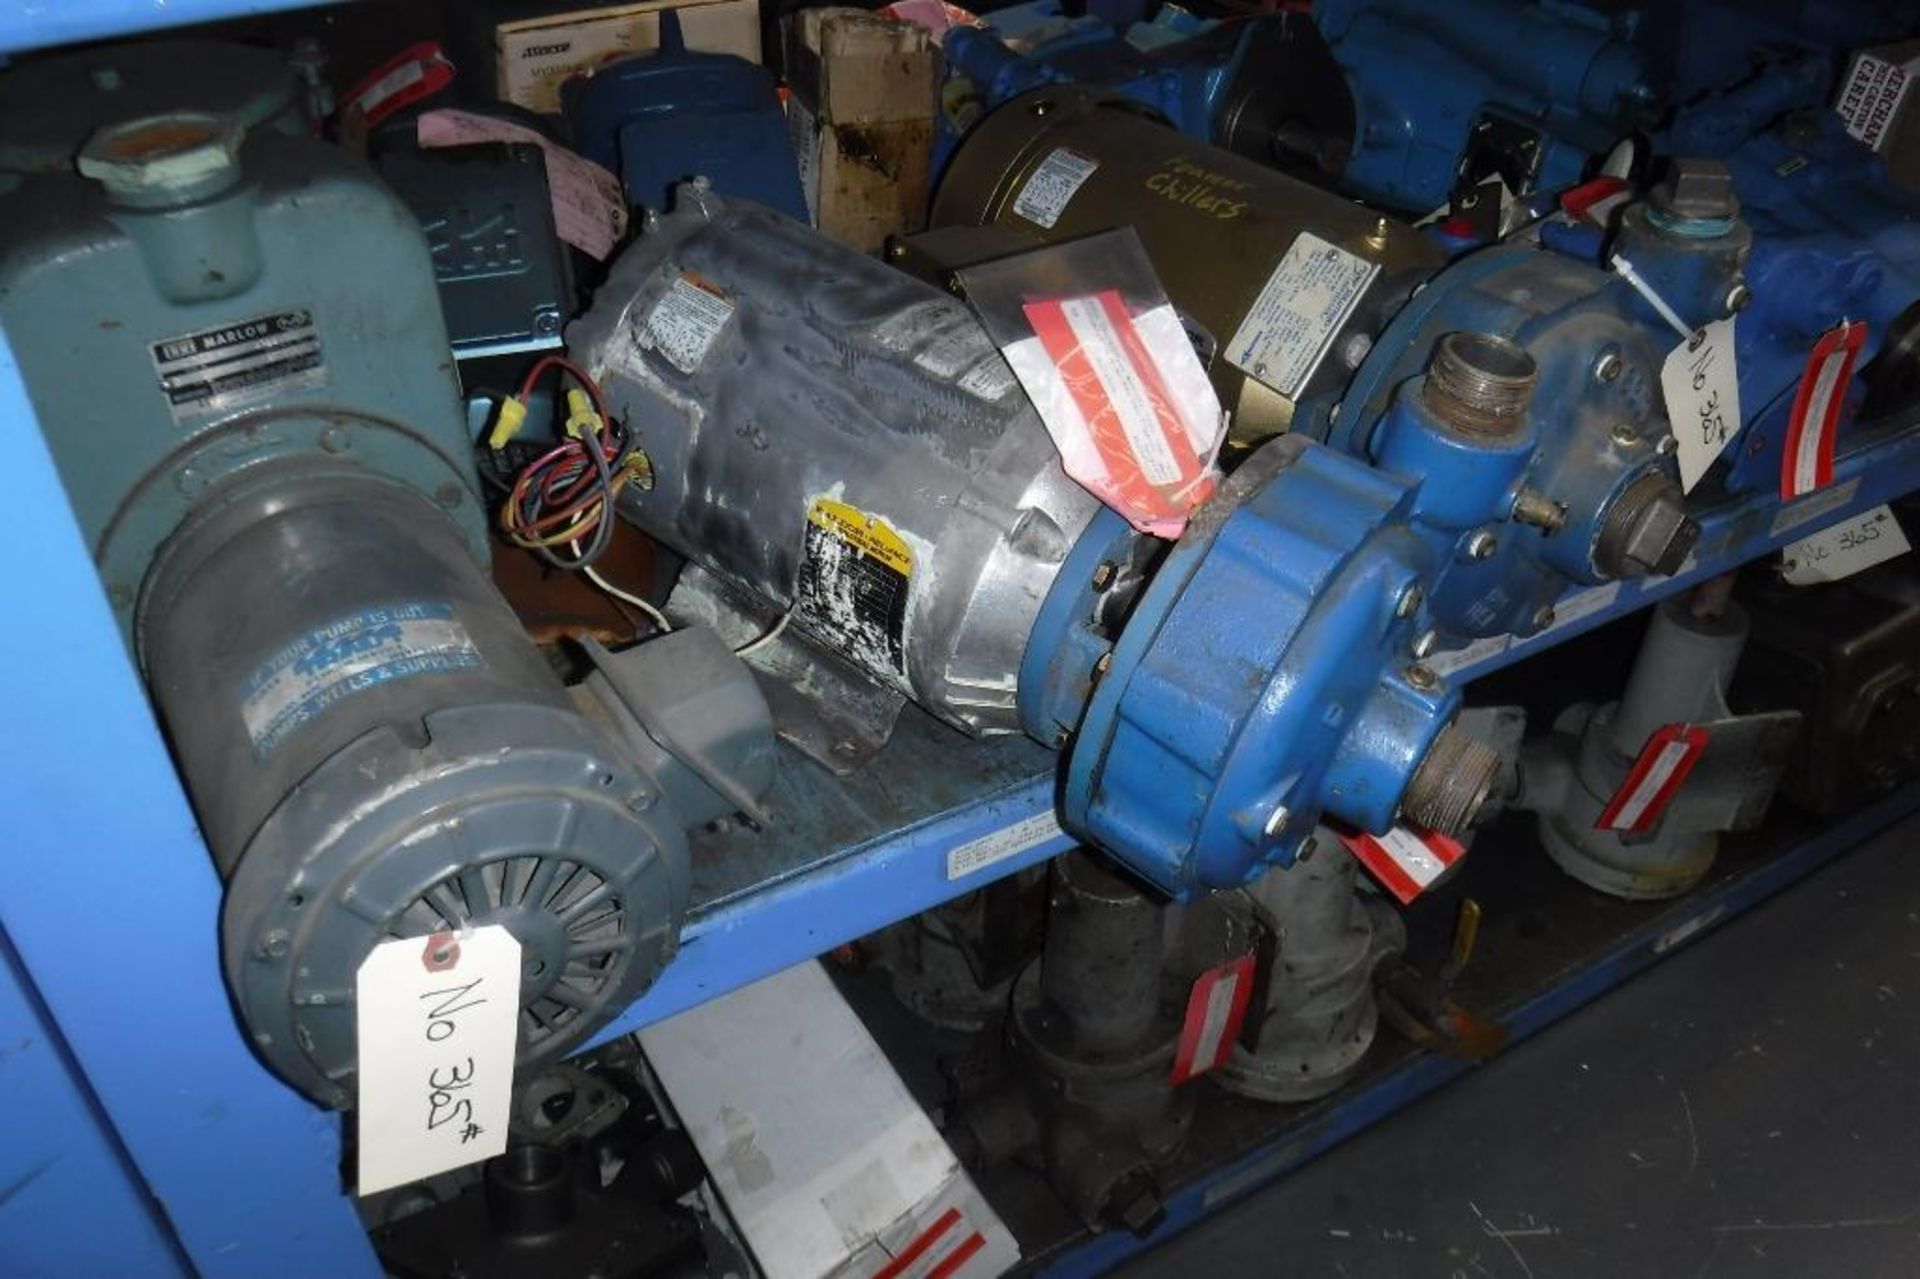 Contents of Rack 505S-Gear Boxes, Pumps, Etc., MUST REMOVE BY 2/14/20-MUST BE REMOVED IN THE ENTIRIT - Image 11 of 34